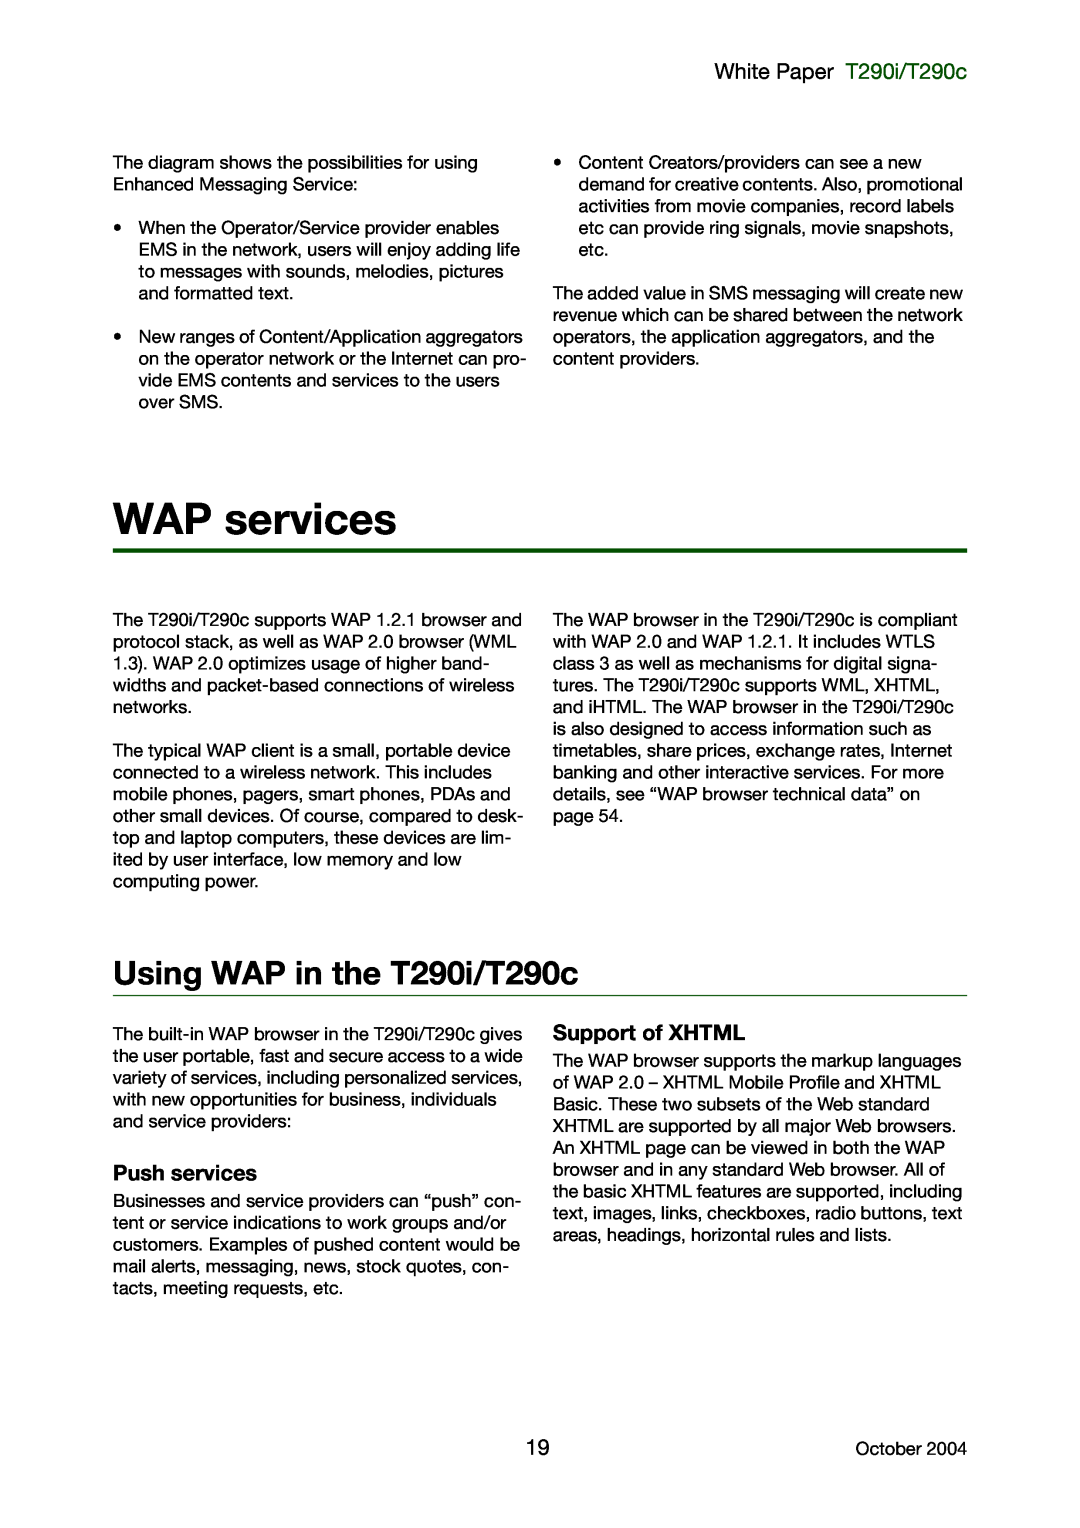 Sony Ericsson manual WAP services, Using WAP in the T290i/T290c, White Paper T290i/T290c 